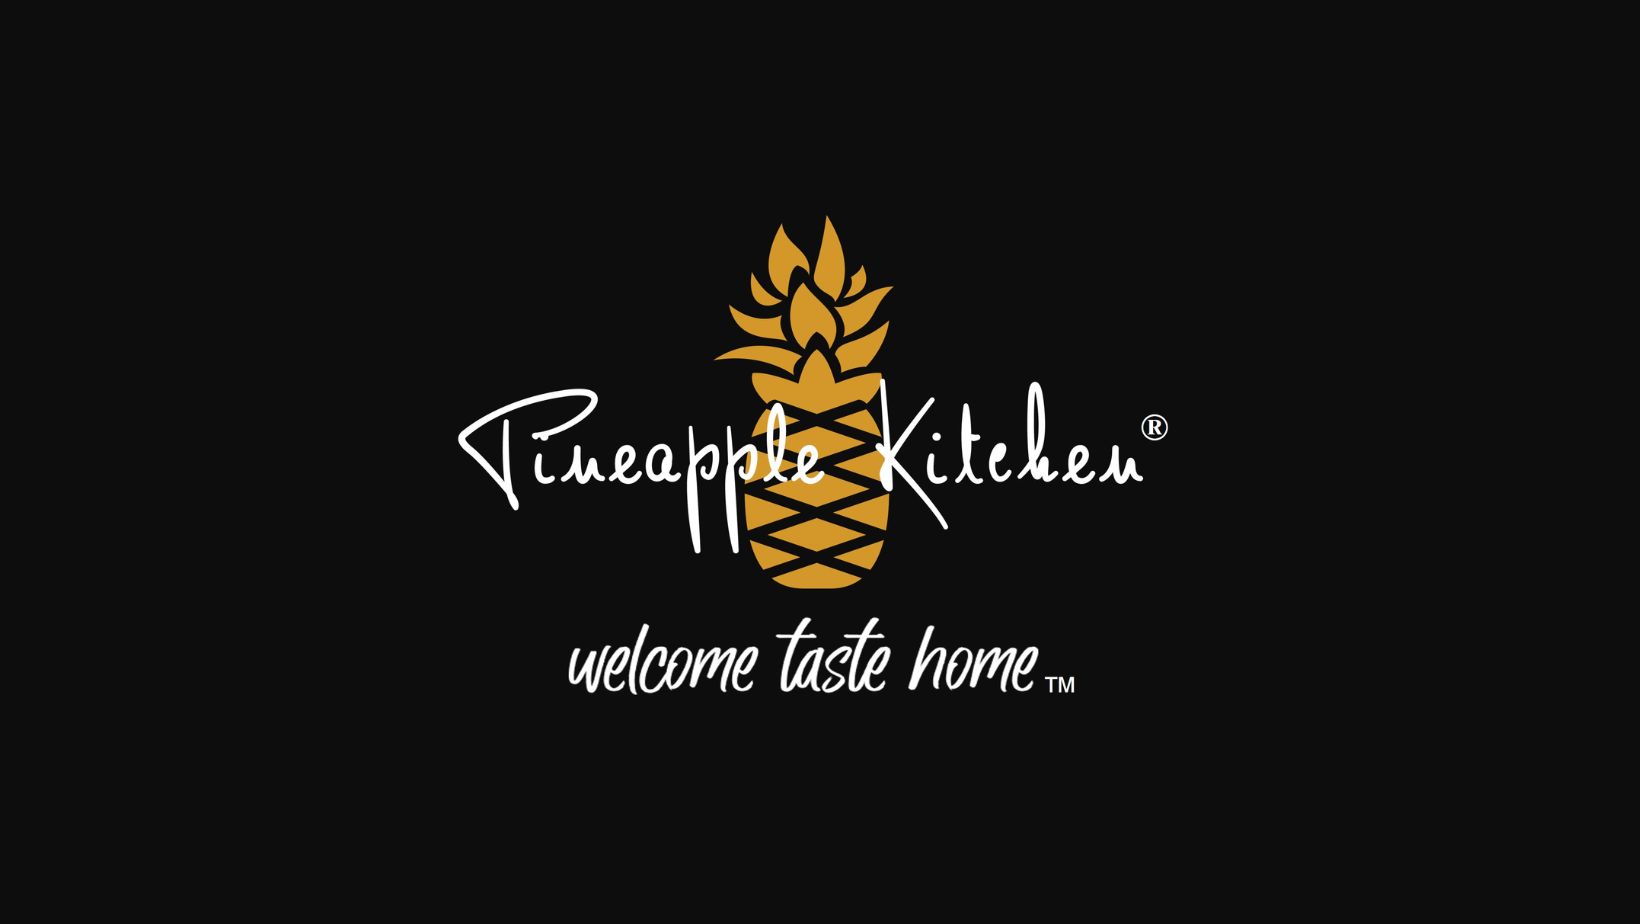 Cooking at Pineapple Kitchen